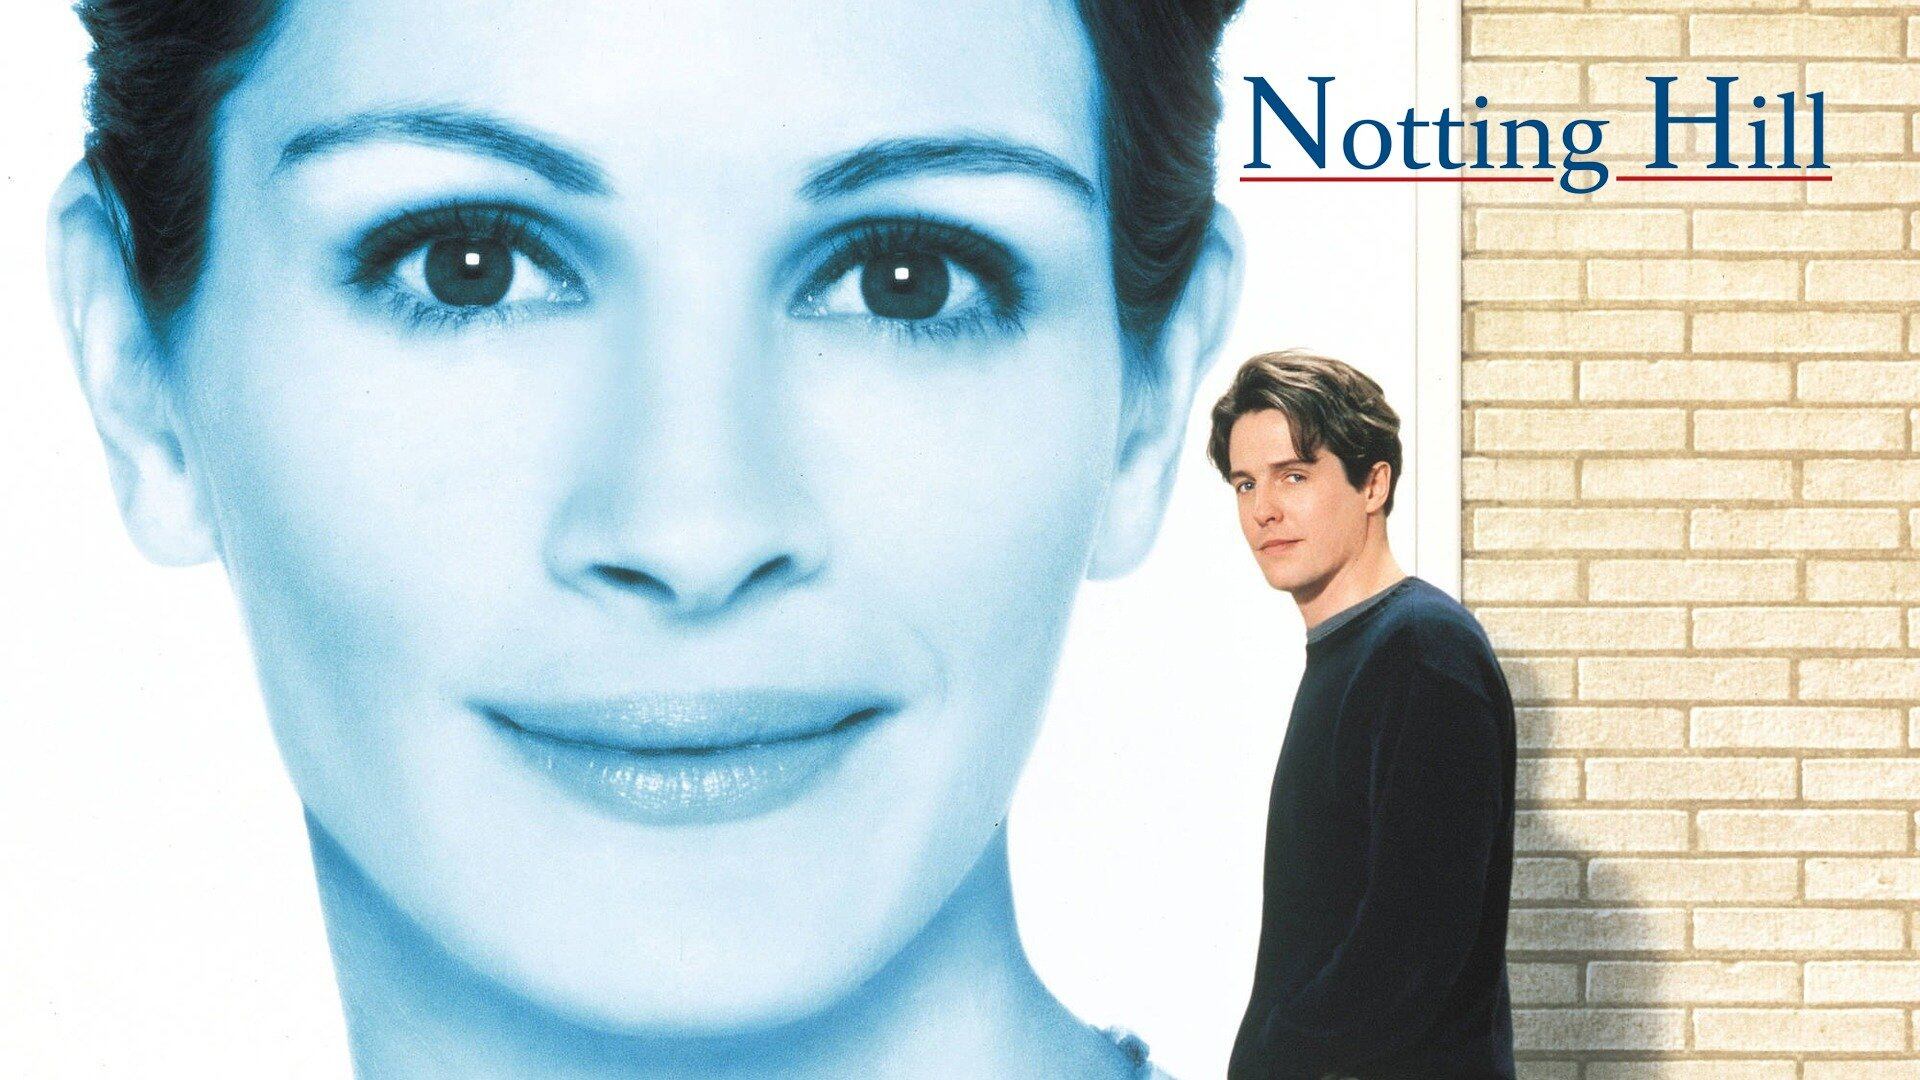 37 Facts about the movie Notting Hill - Facts.net